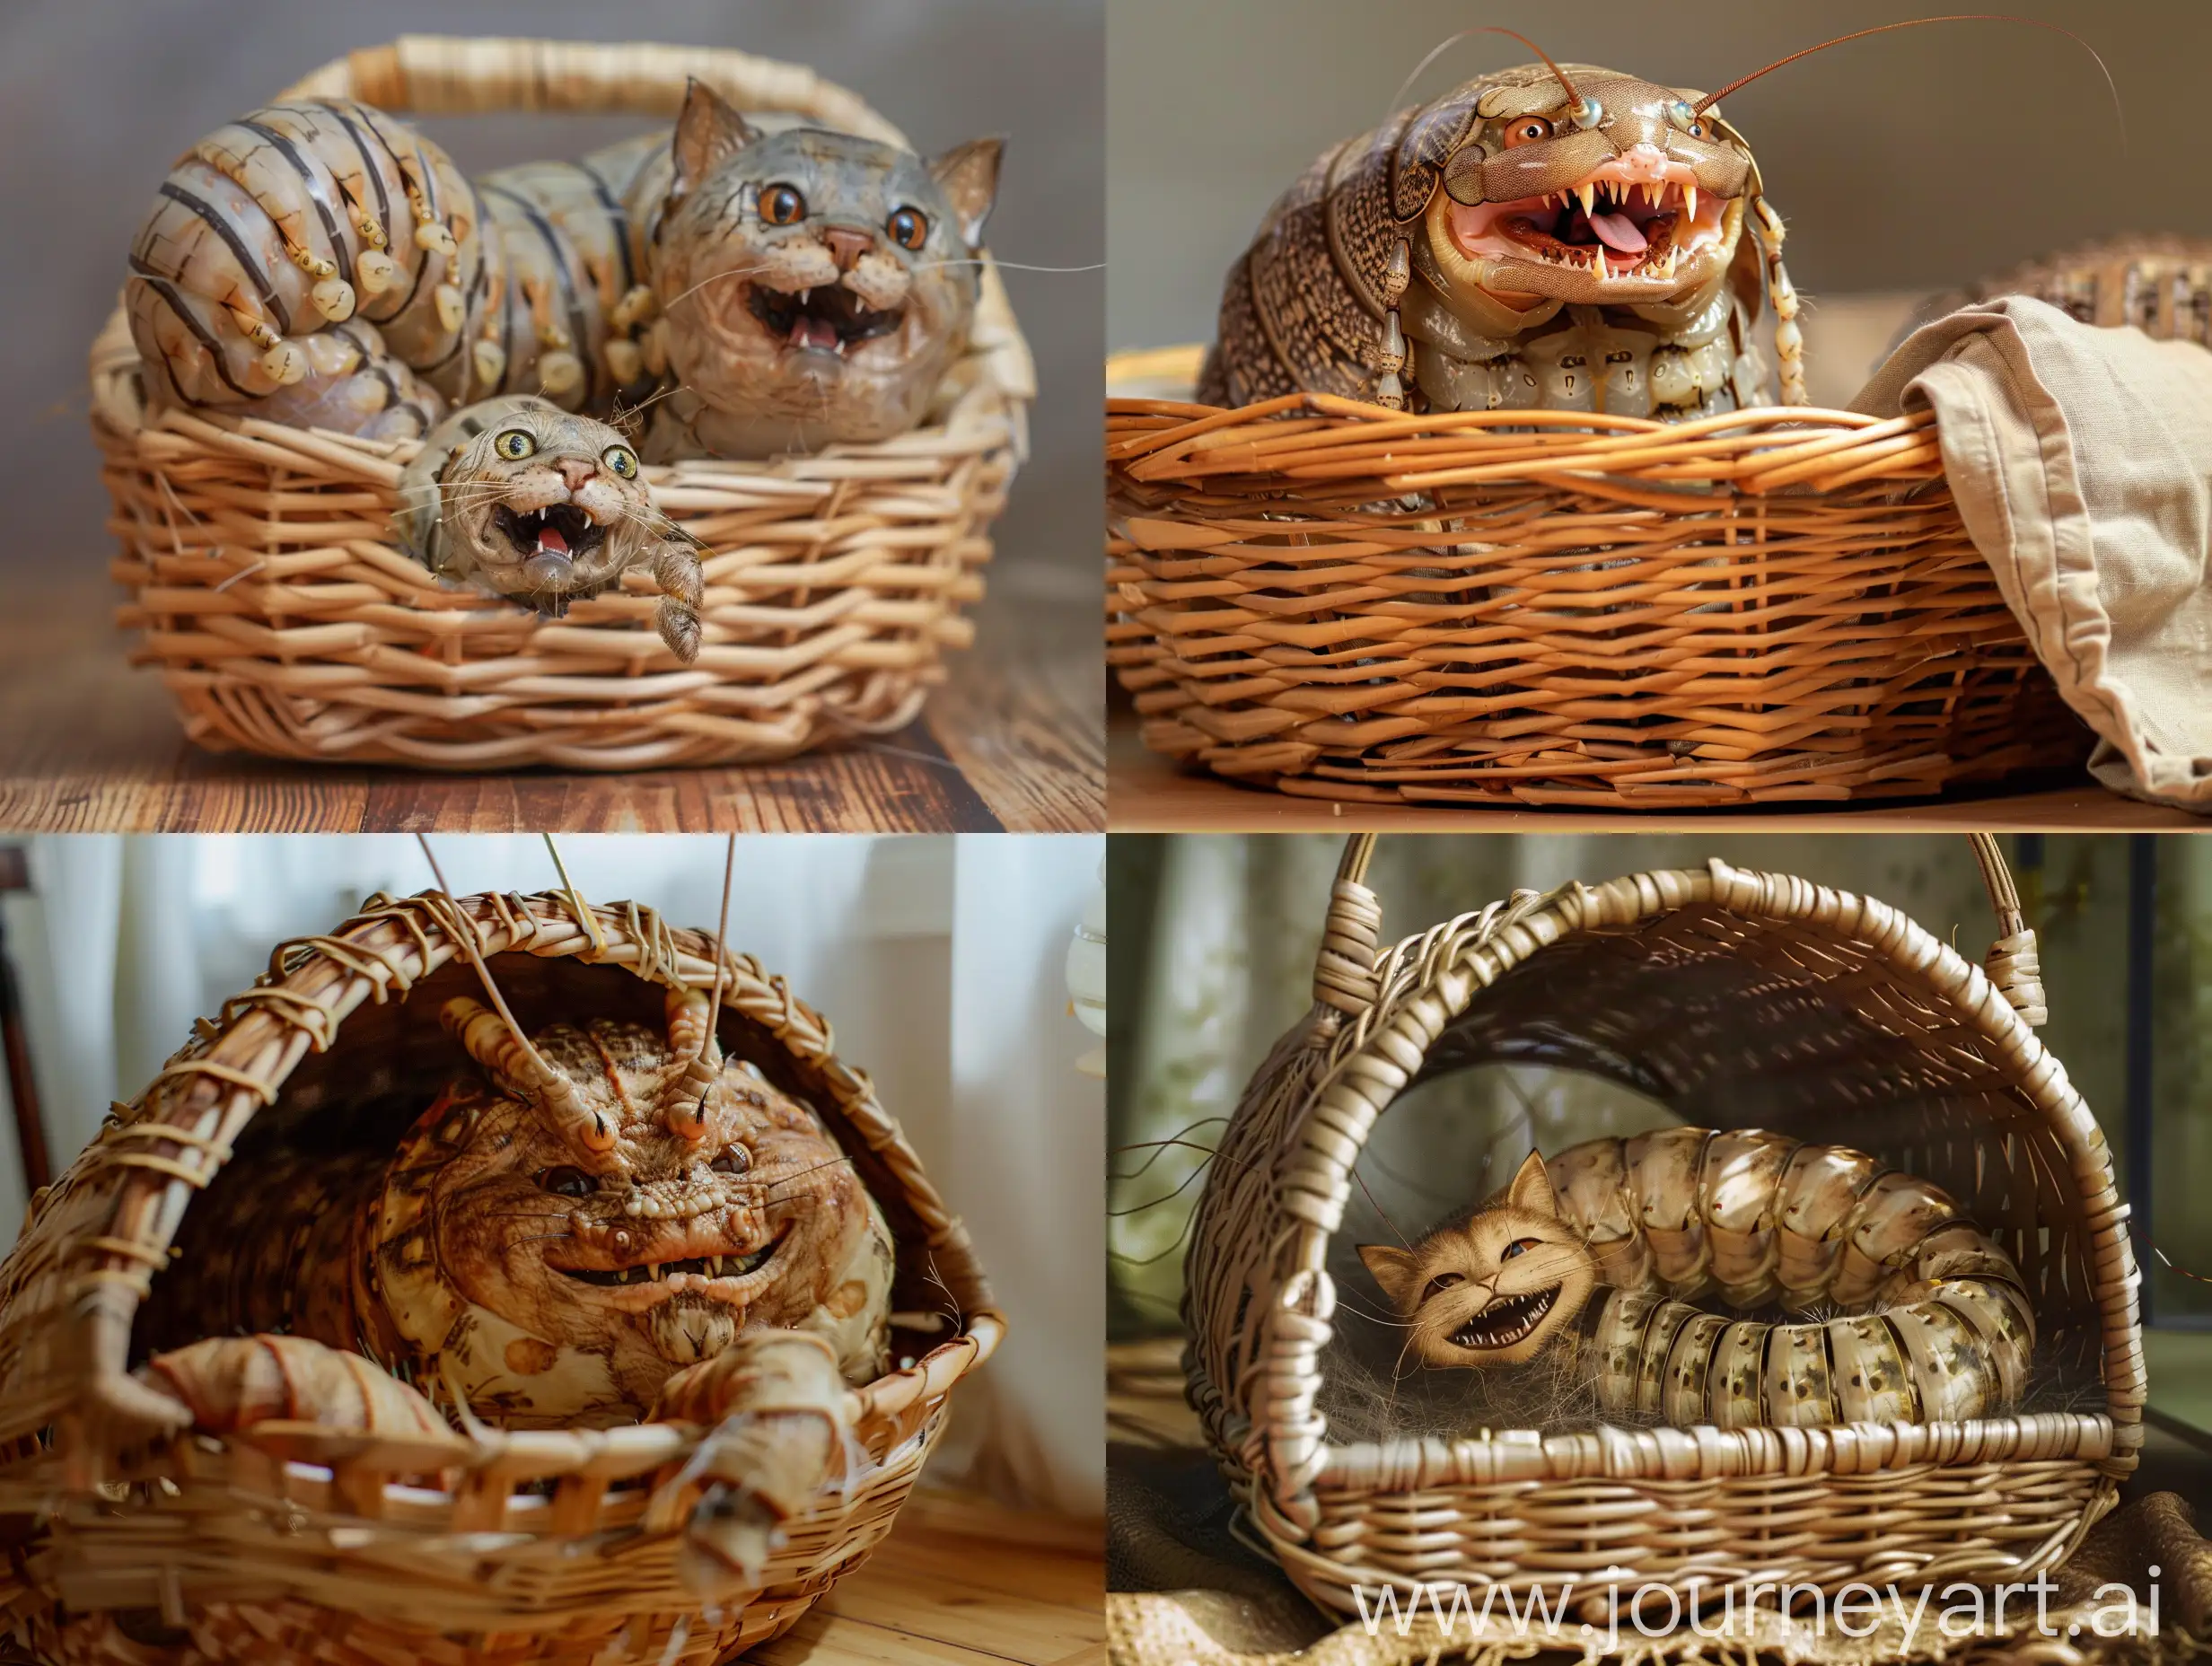 A big giant silkworm the size of a cat is in the wicker basket and his face is similar to a cat, and smile. make a realistic photo with high details. 